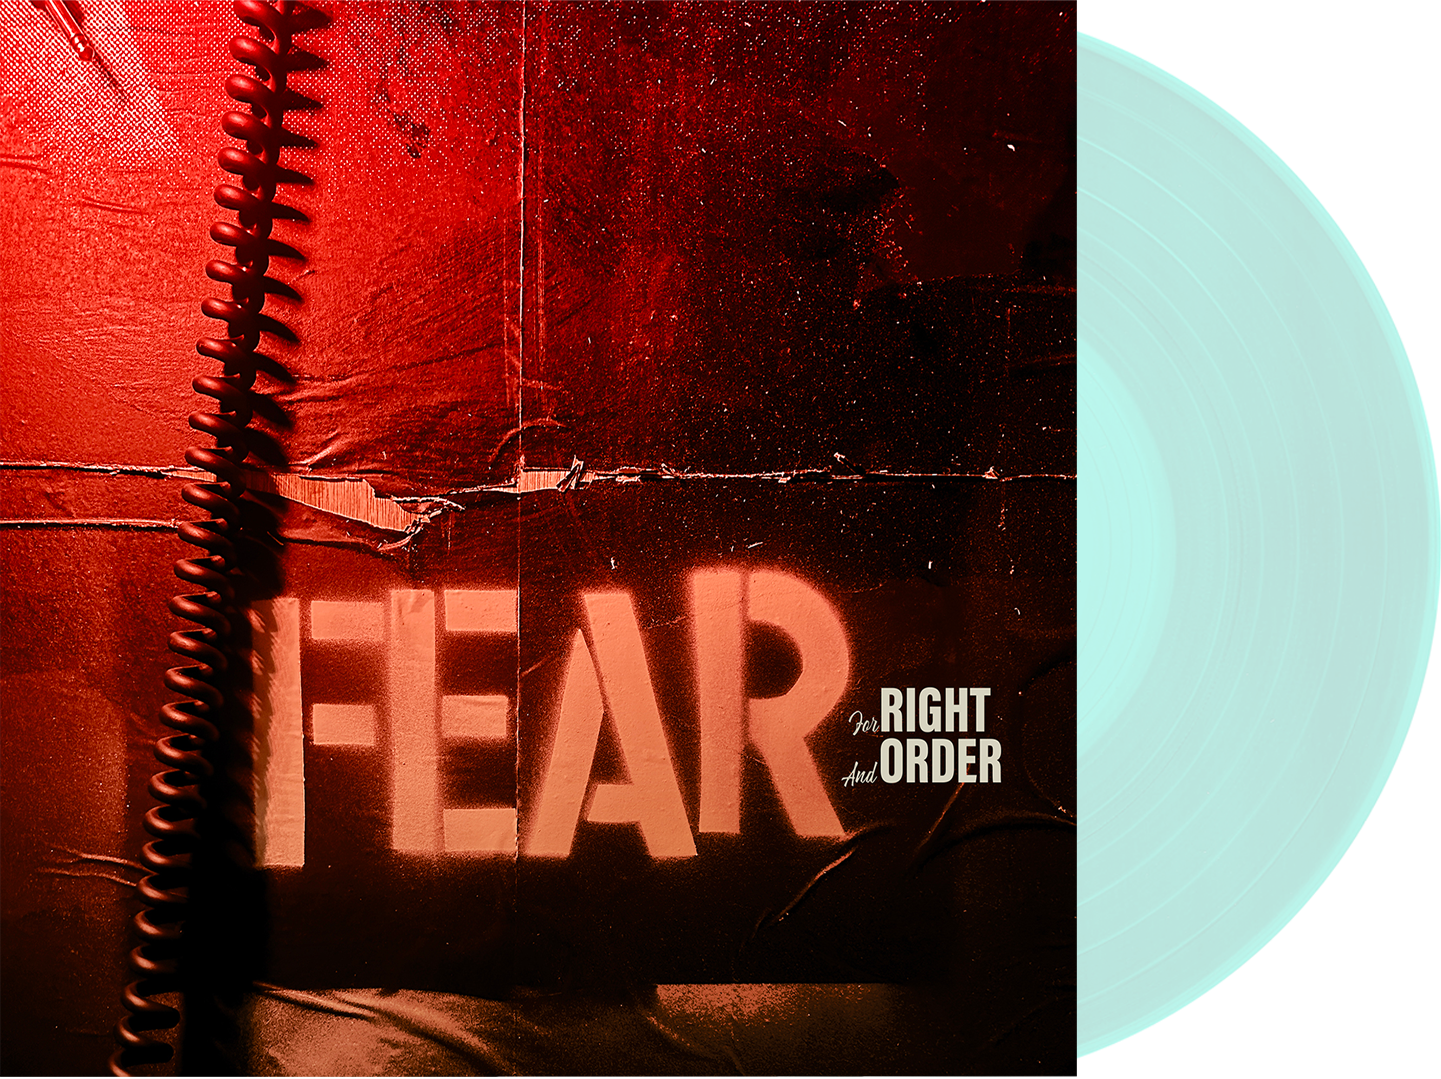 FEAR "FOR RIGHT AND ORDER" LIMITED EDITION COKE BOTTLE CLEAR VINYL LP PRE-ORDER EDITION